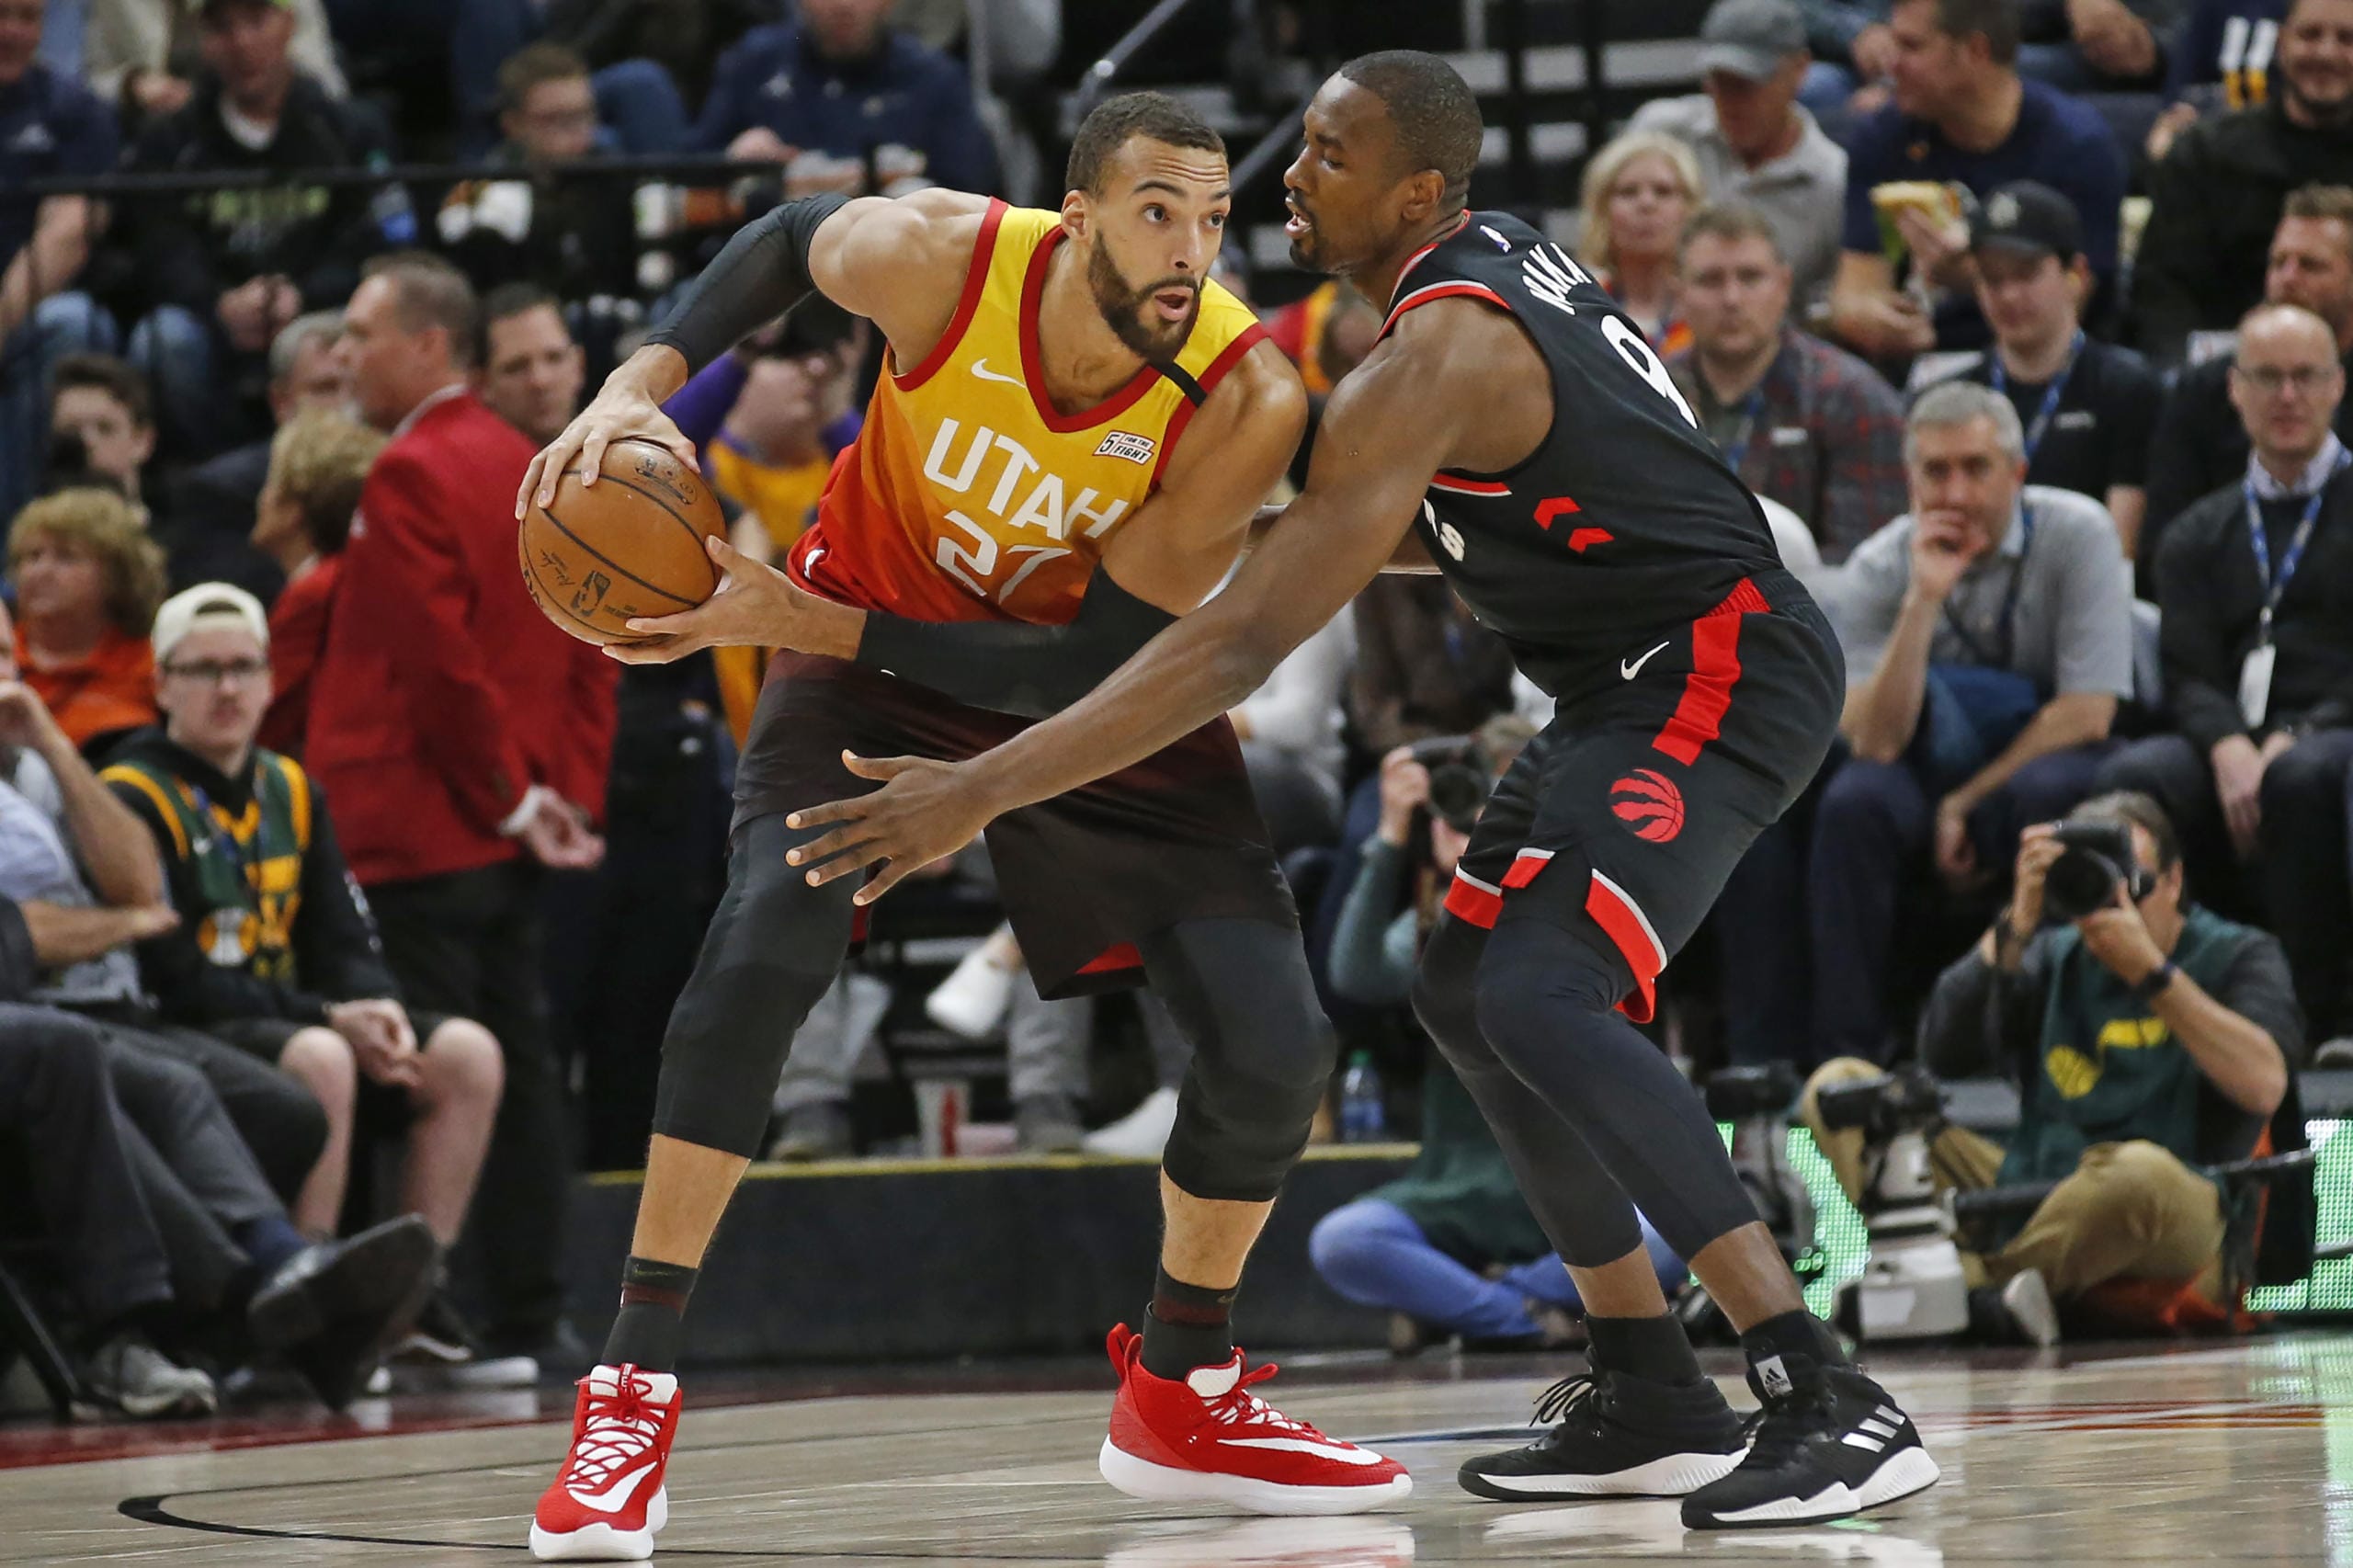 Toronto Raptors center Serge Ibaka (9) guards against Utah Jazz center Rudy Gobert (27) in the first half during an NBA basketball game Monday, March 9, 2020, in Salt Lake City.